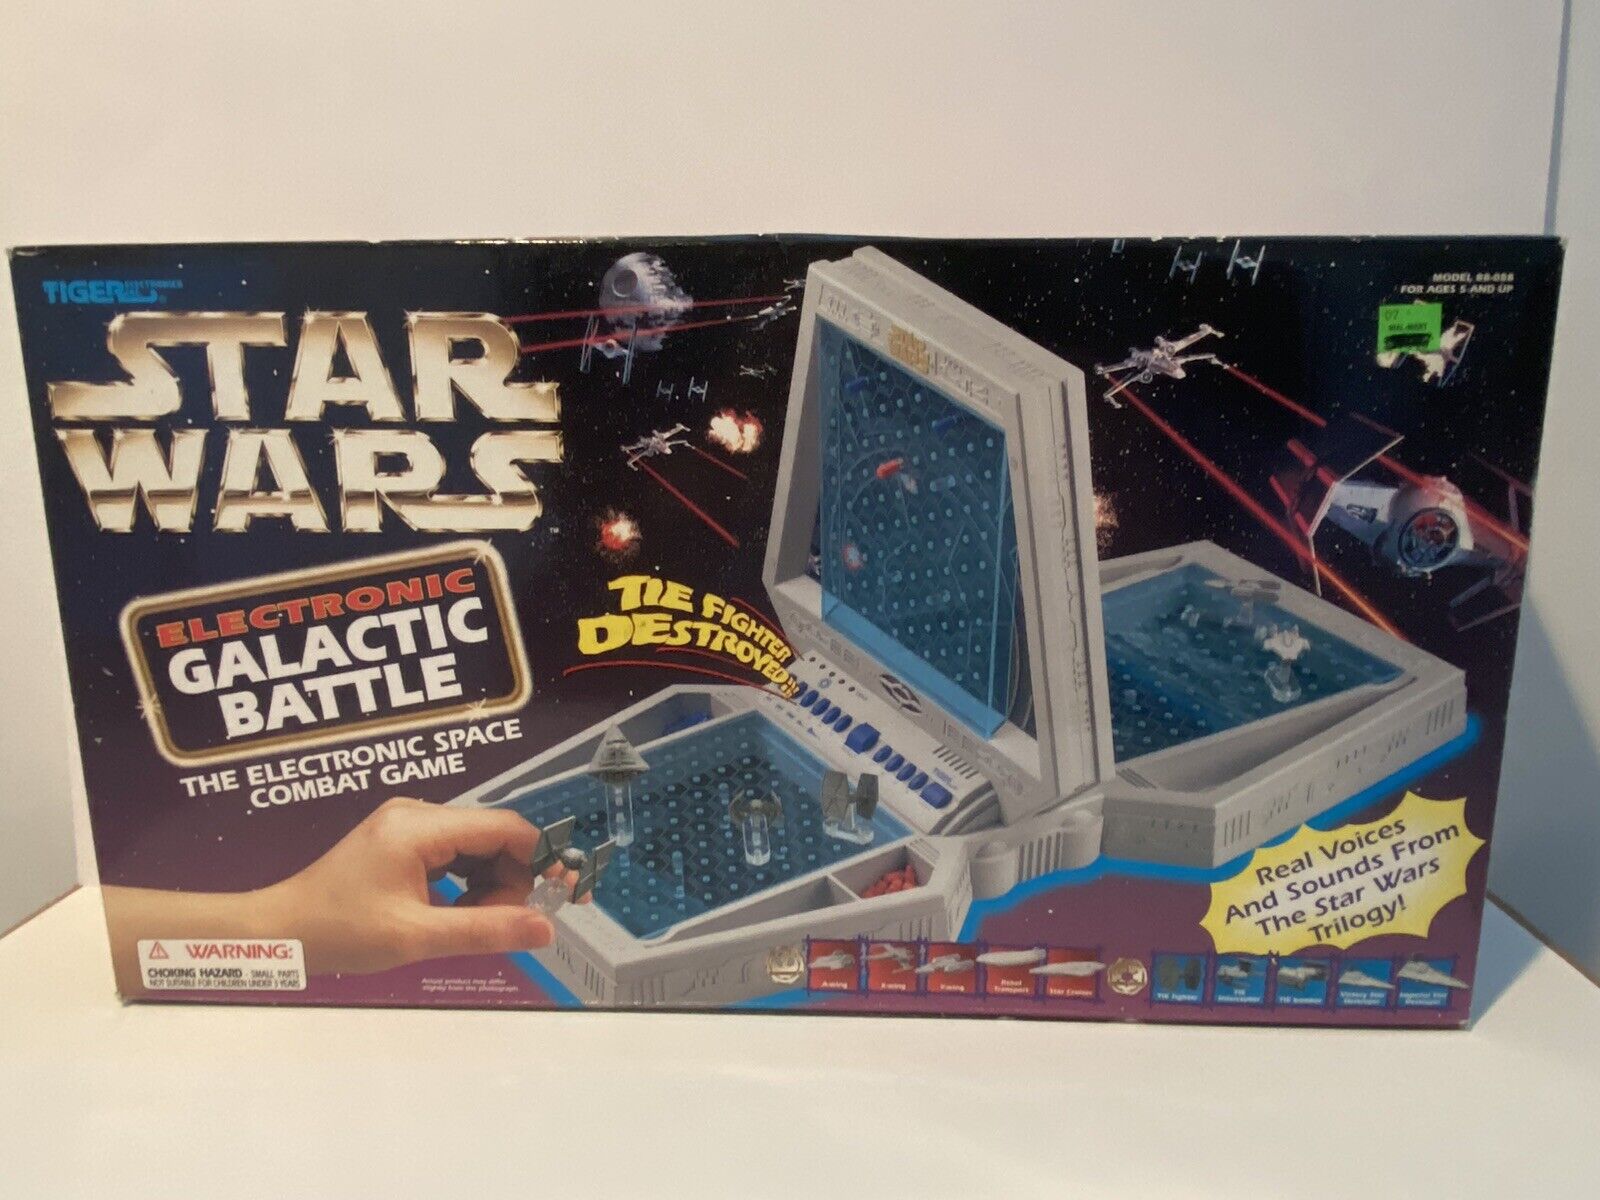 Rare Vintage Star Wars Galactic Battle by Tiger (Brand New)